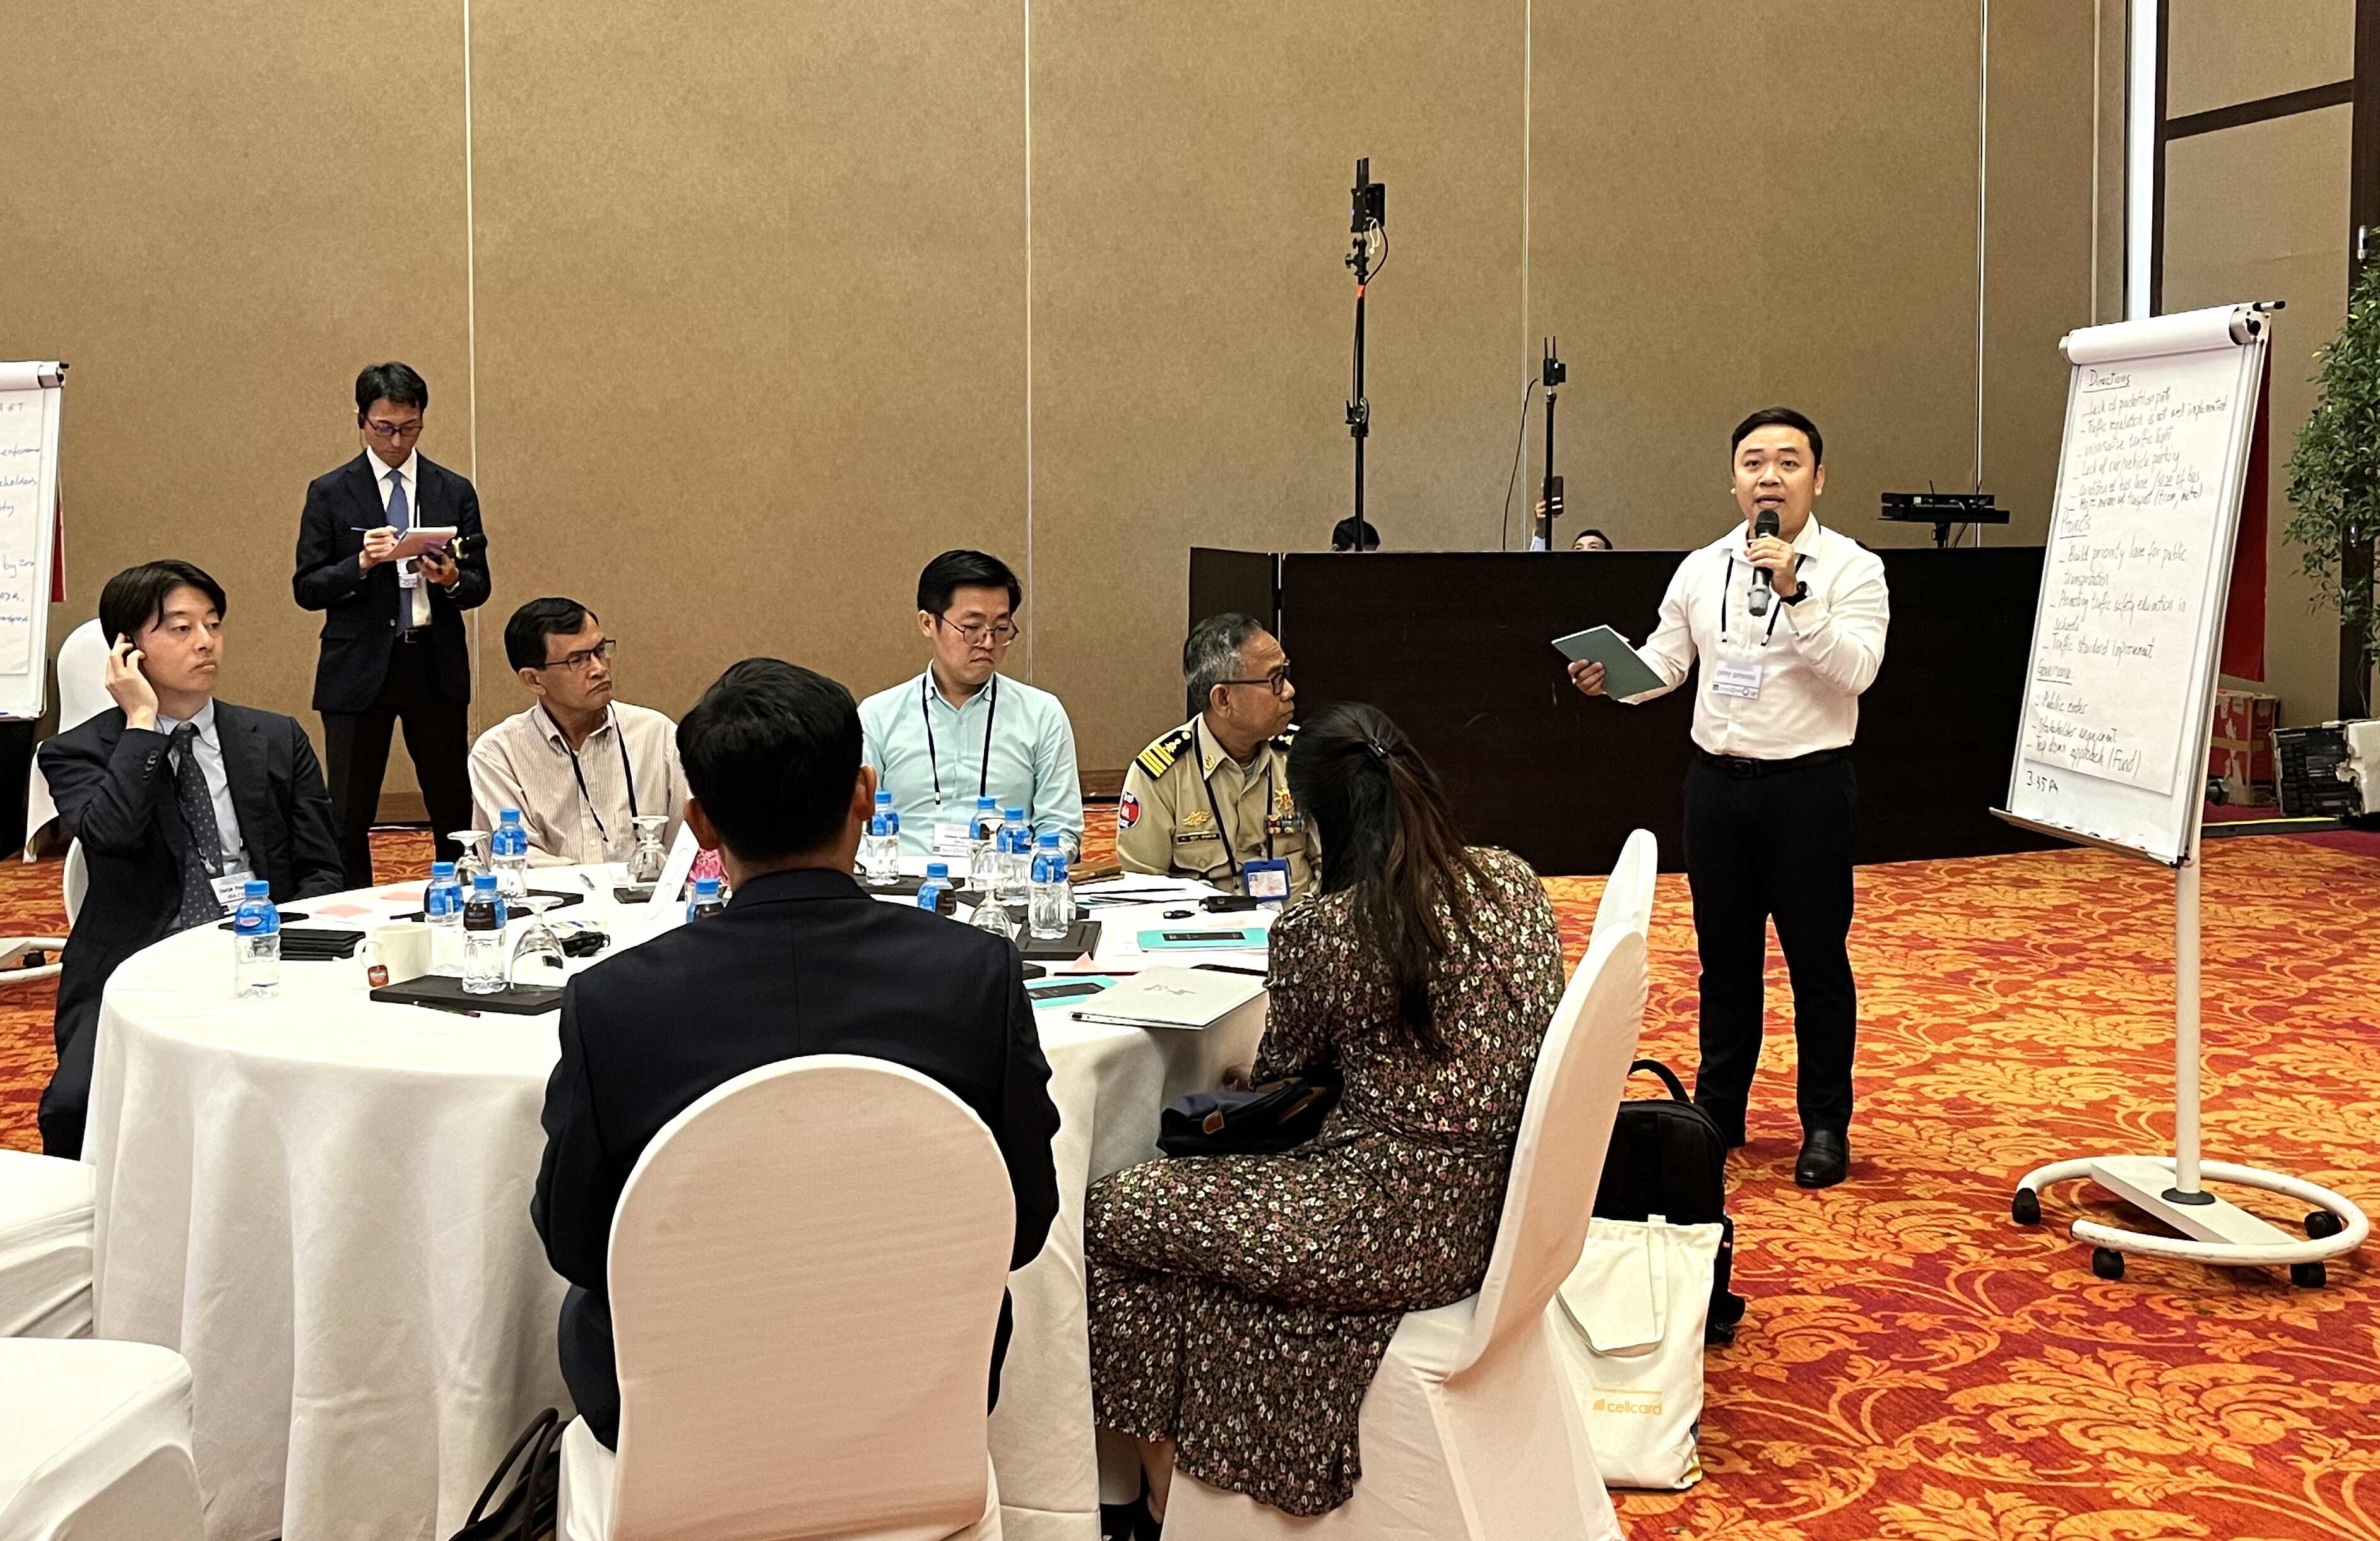 Session 3 - Breakthrough Actions, group discussions; each group team leader presented group’s recommendation on urban mobility planning.